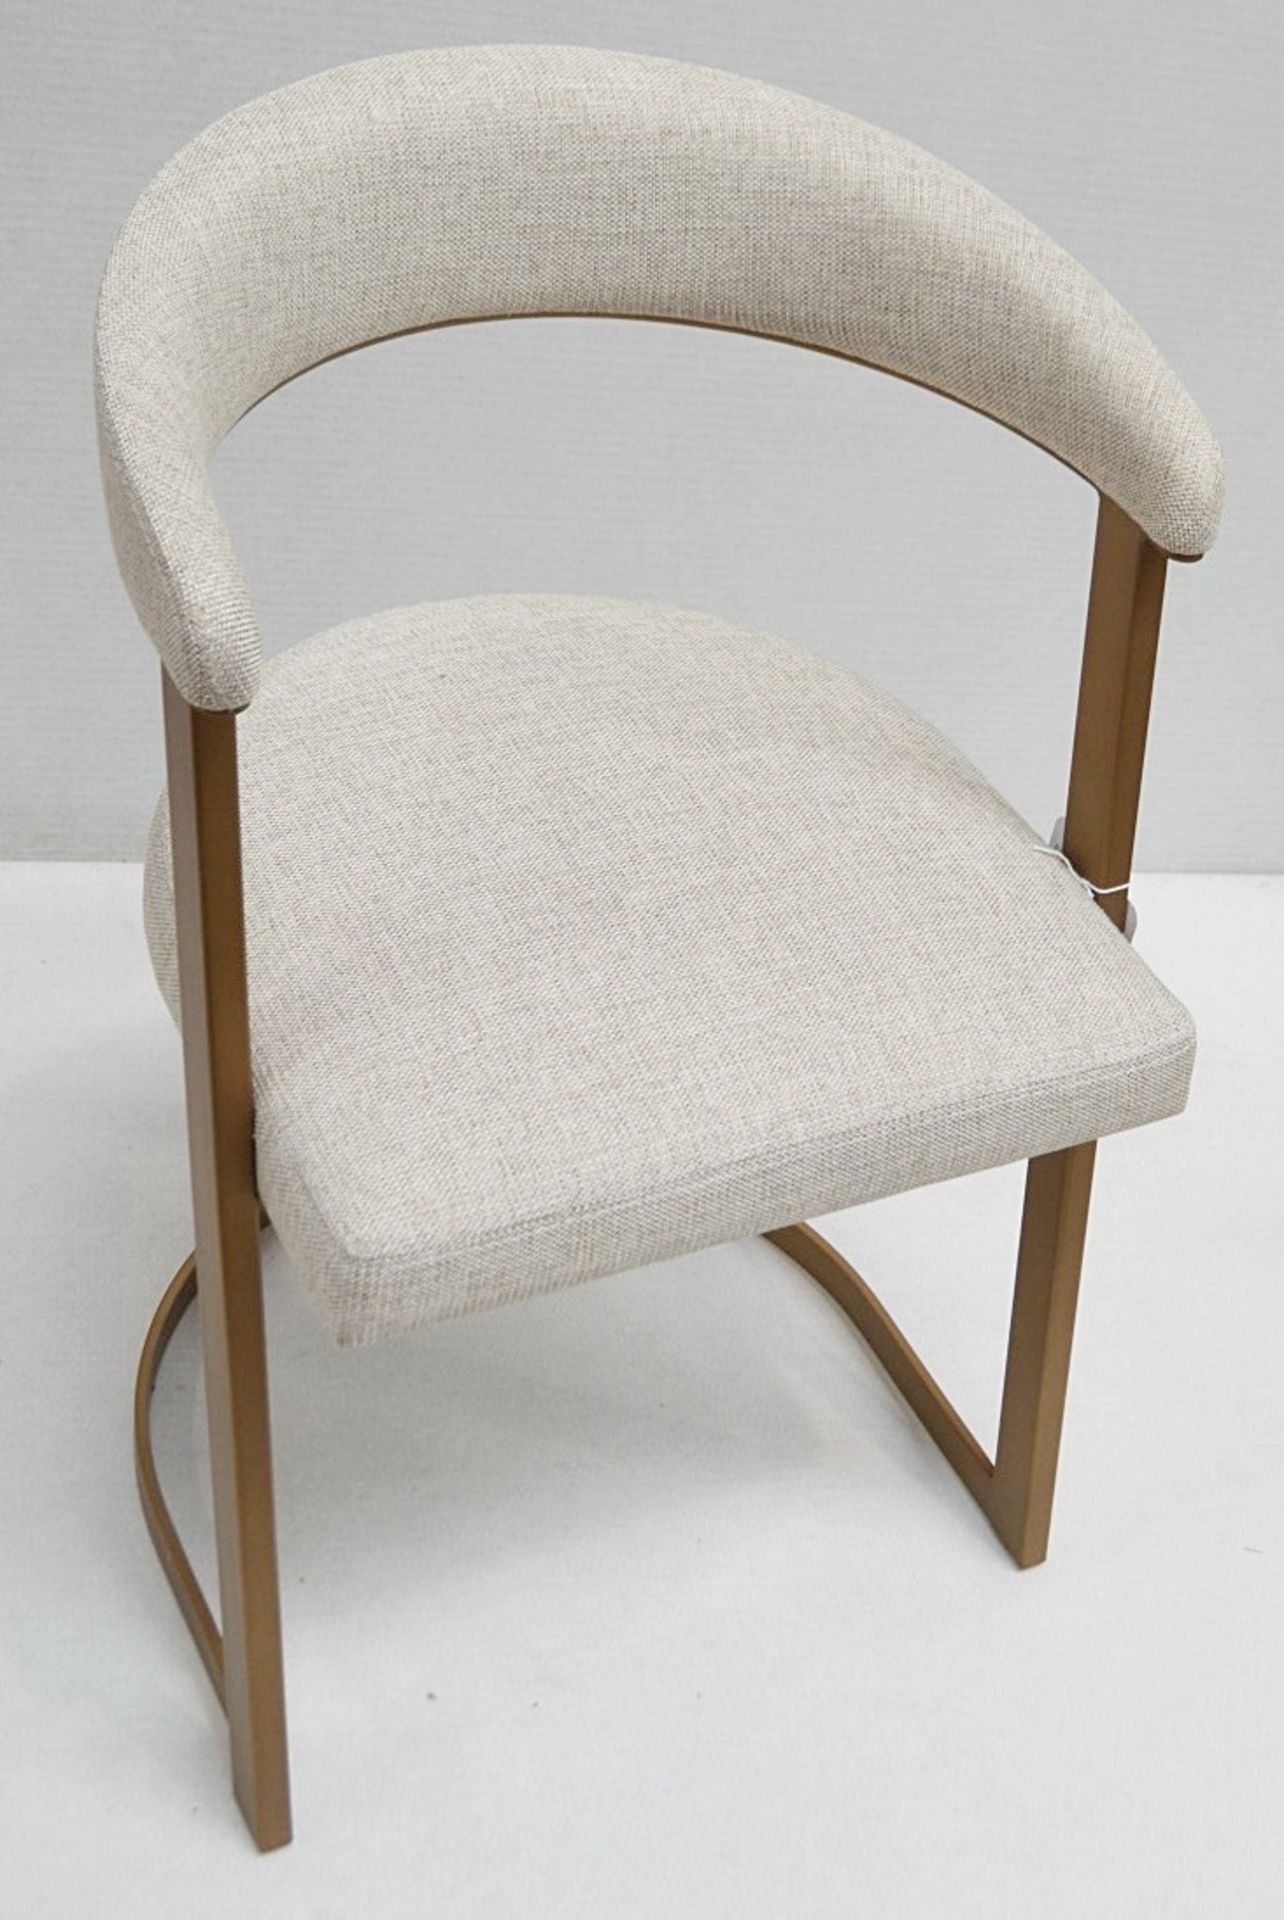 1 x EICHHOLTZ 'Dexter' Upholstered Brass Chair - In A Loki Natural Upholstery - Ref: 5836364/JUN21 - - Image 4 of 16